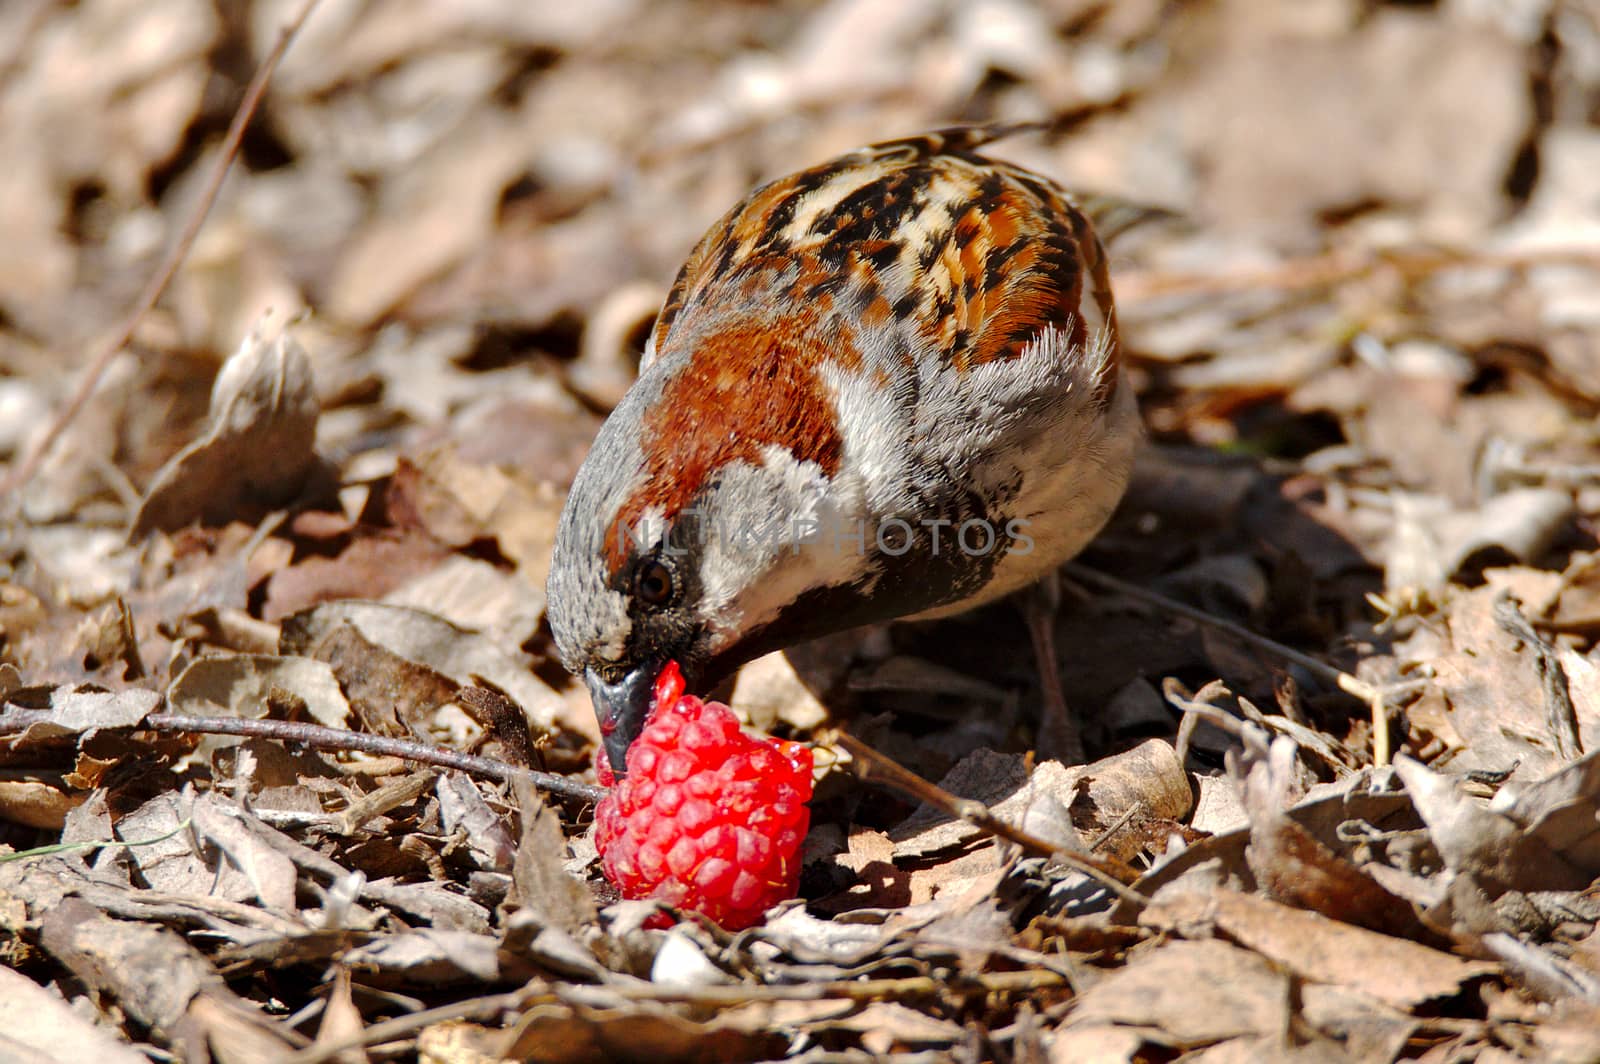 Hungry sparrow eating a red raspberry in the park.